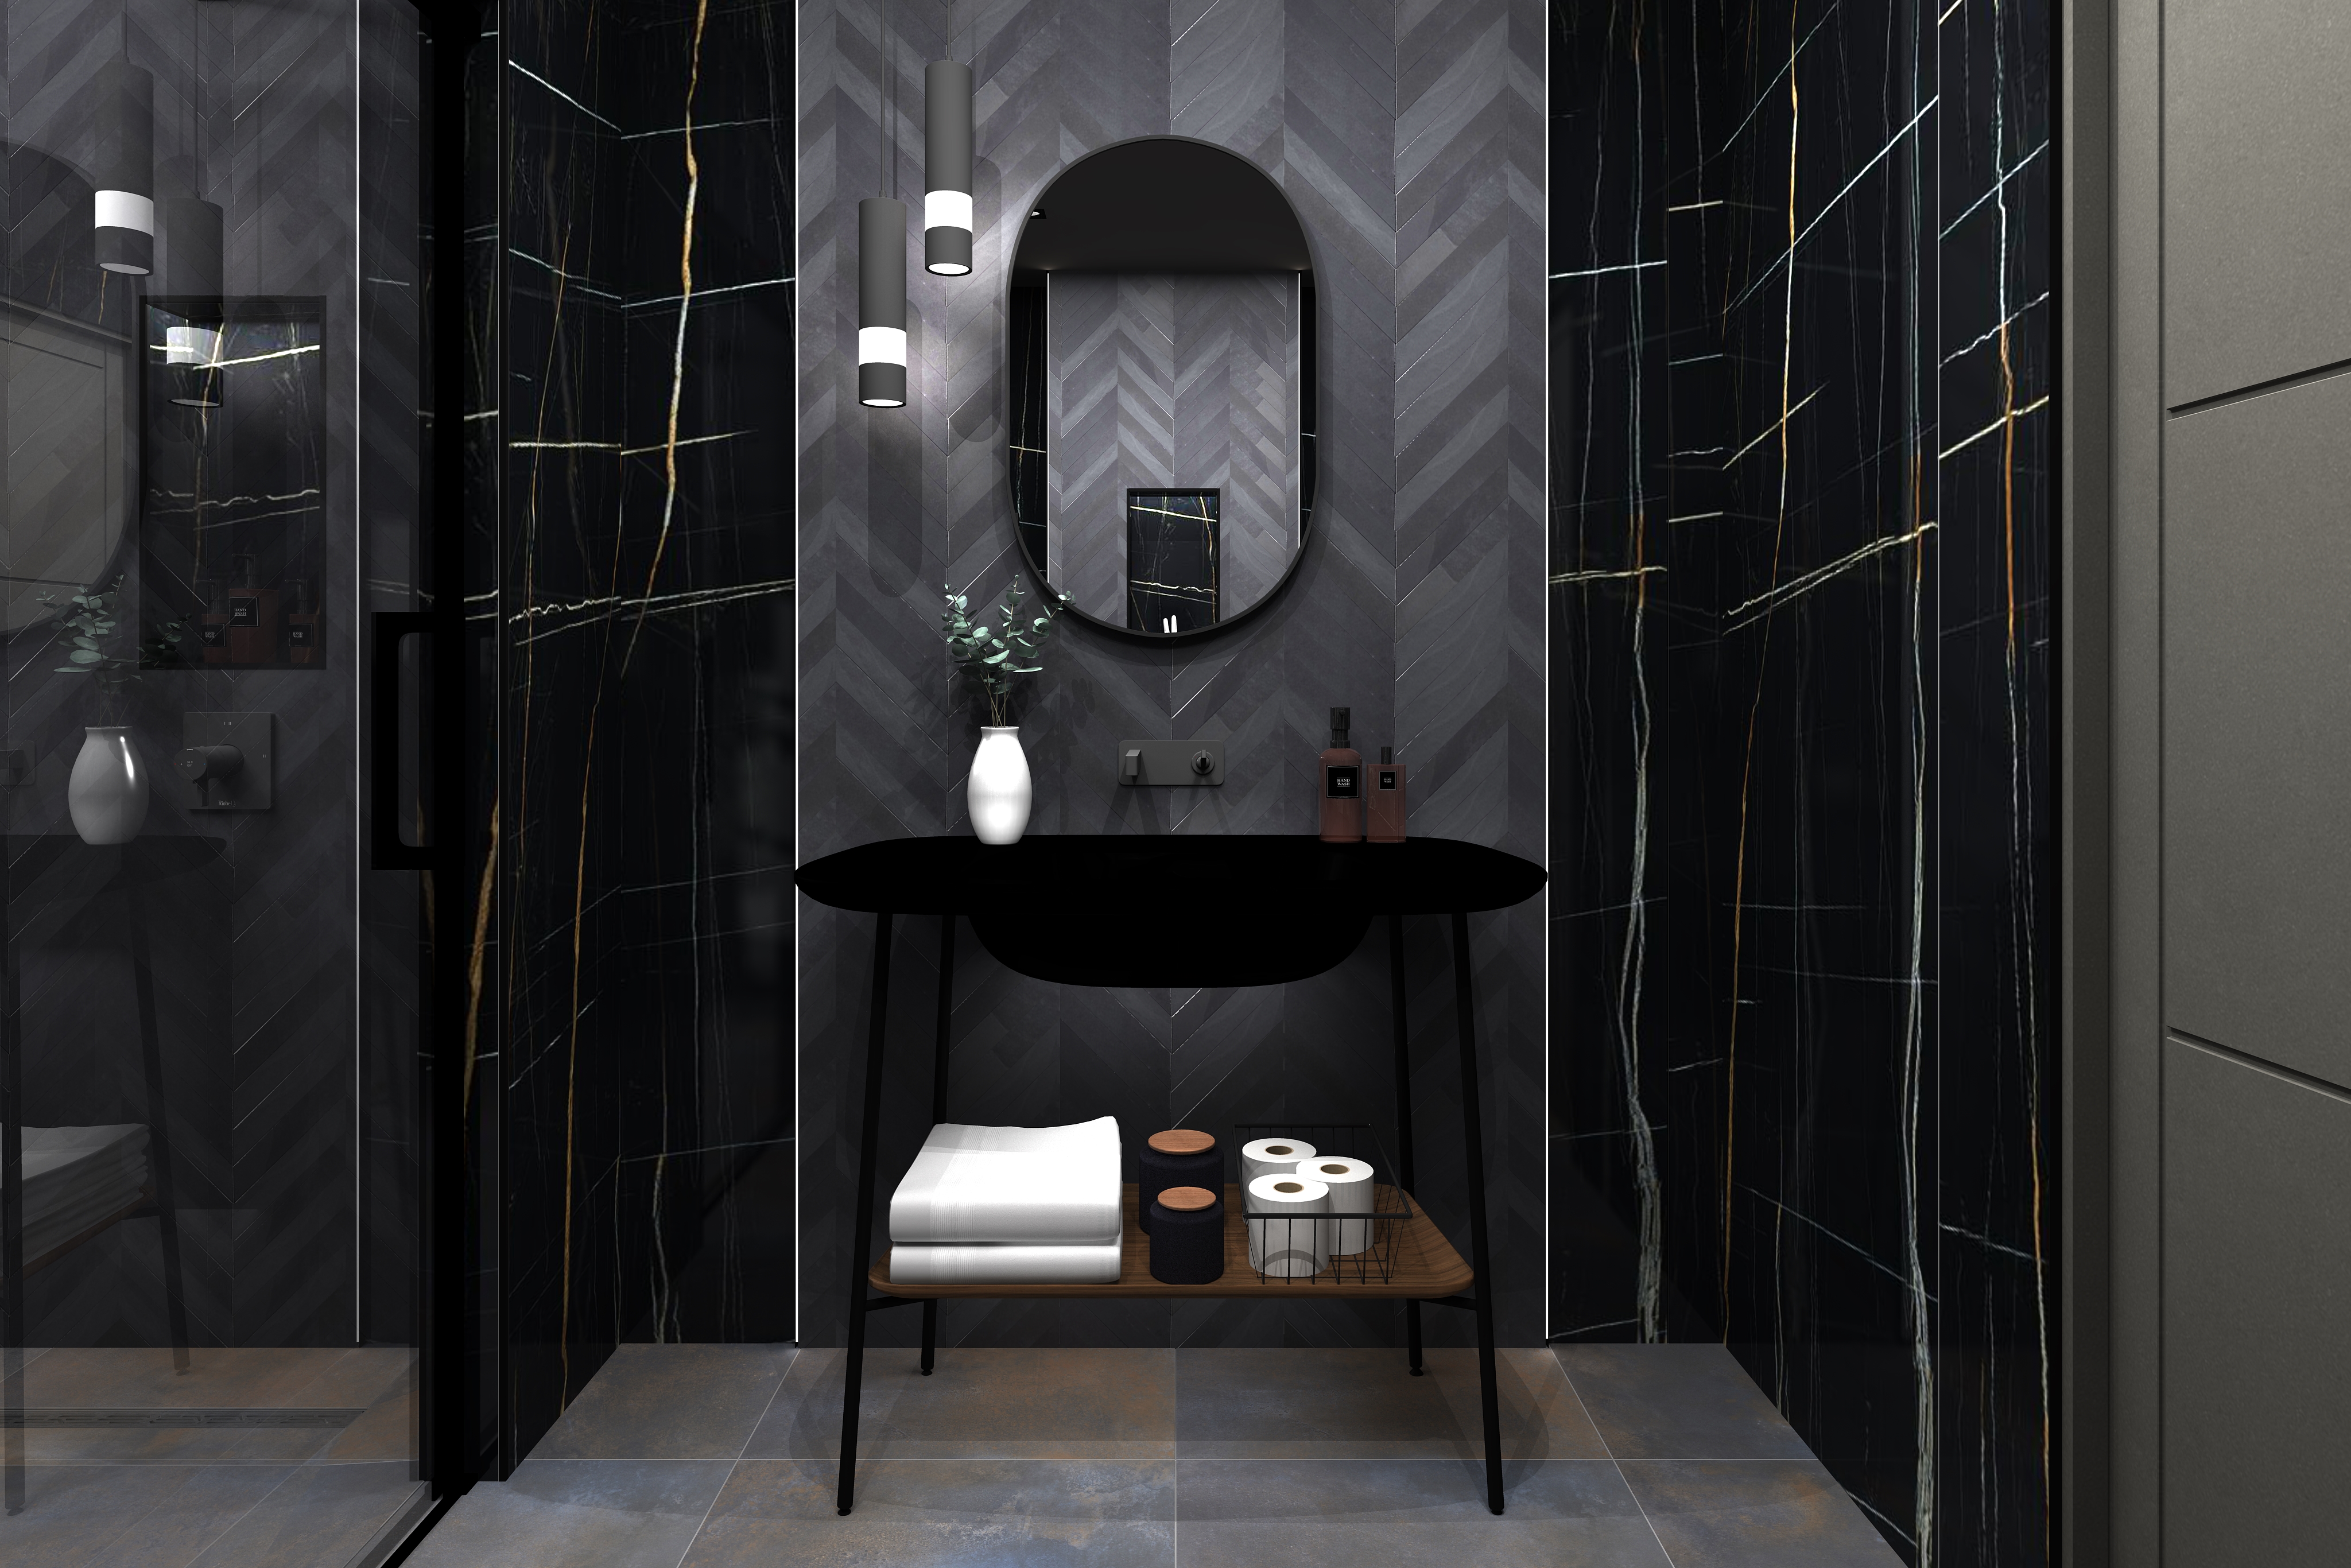 Close up digital lifestyle image the Scorpio inspired bathroom, with chevron patterned grey wall tiles, matt black washstand with wooden shelf holding towels, candles and an Industrial style spare toilet roll basket, wall mounted grey basin tap, capsule mirror and cylindrical celing hung lights